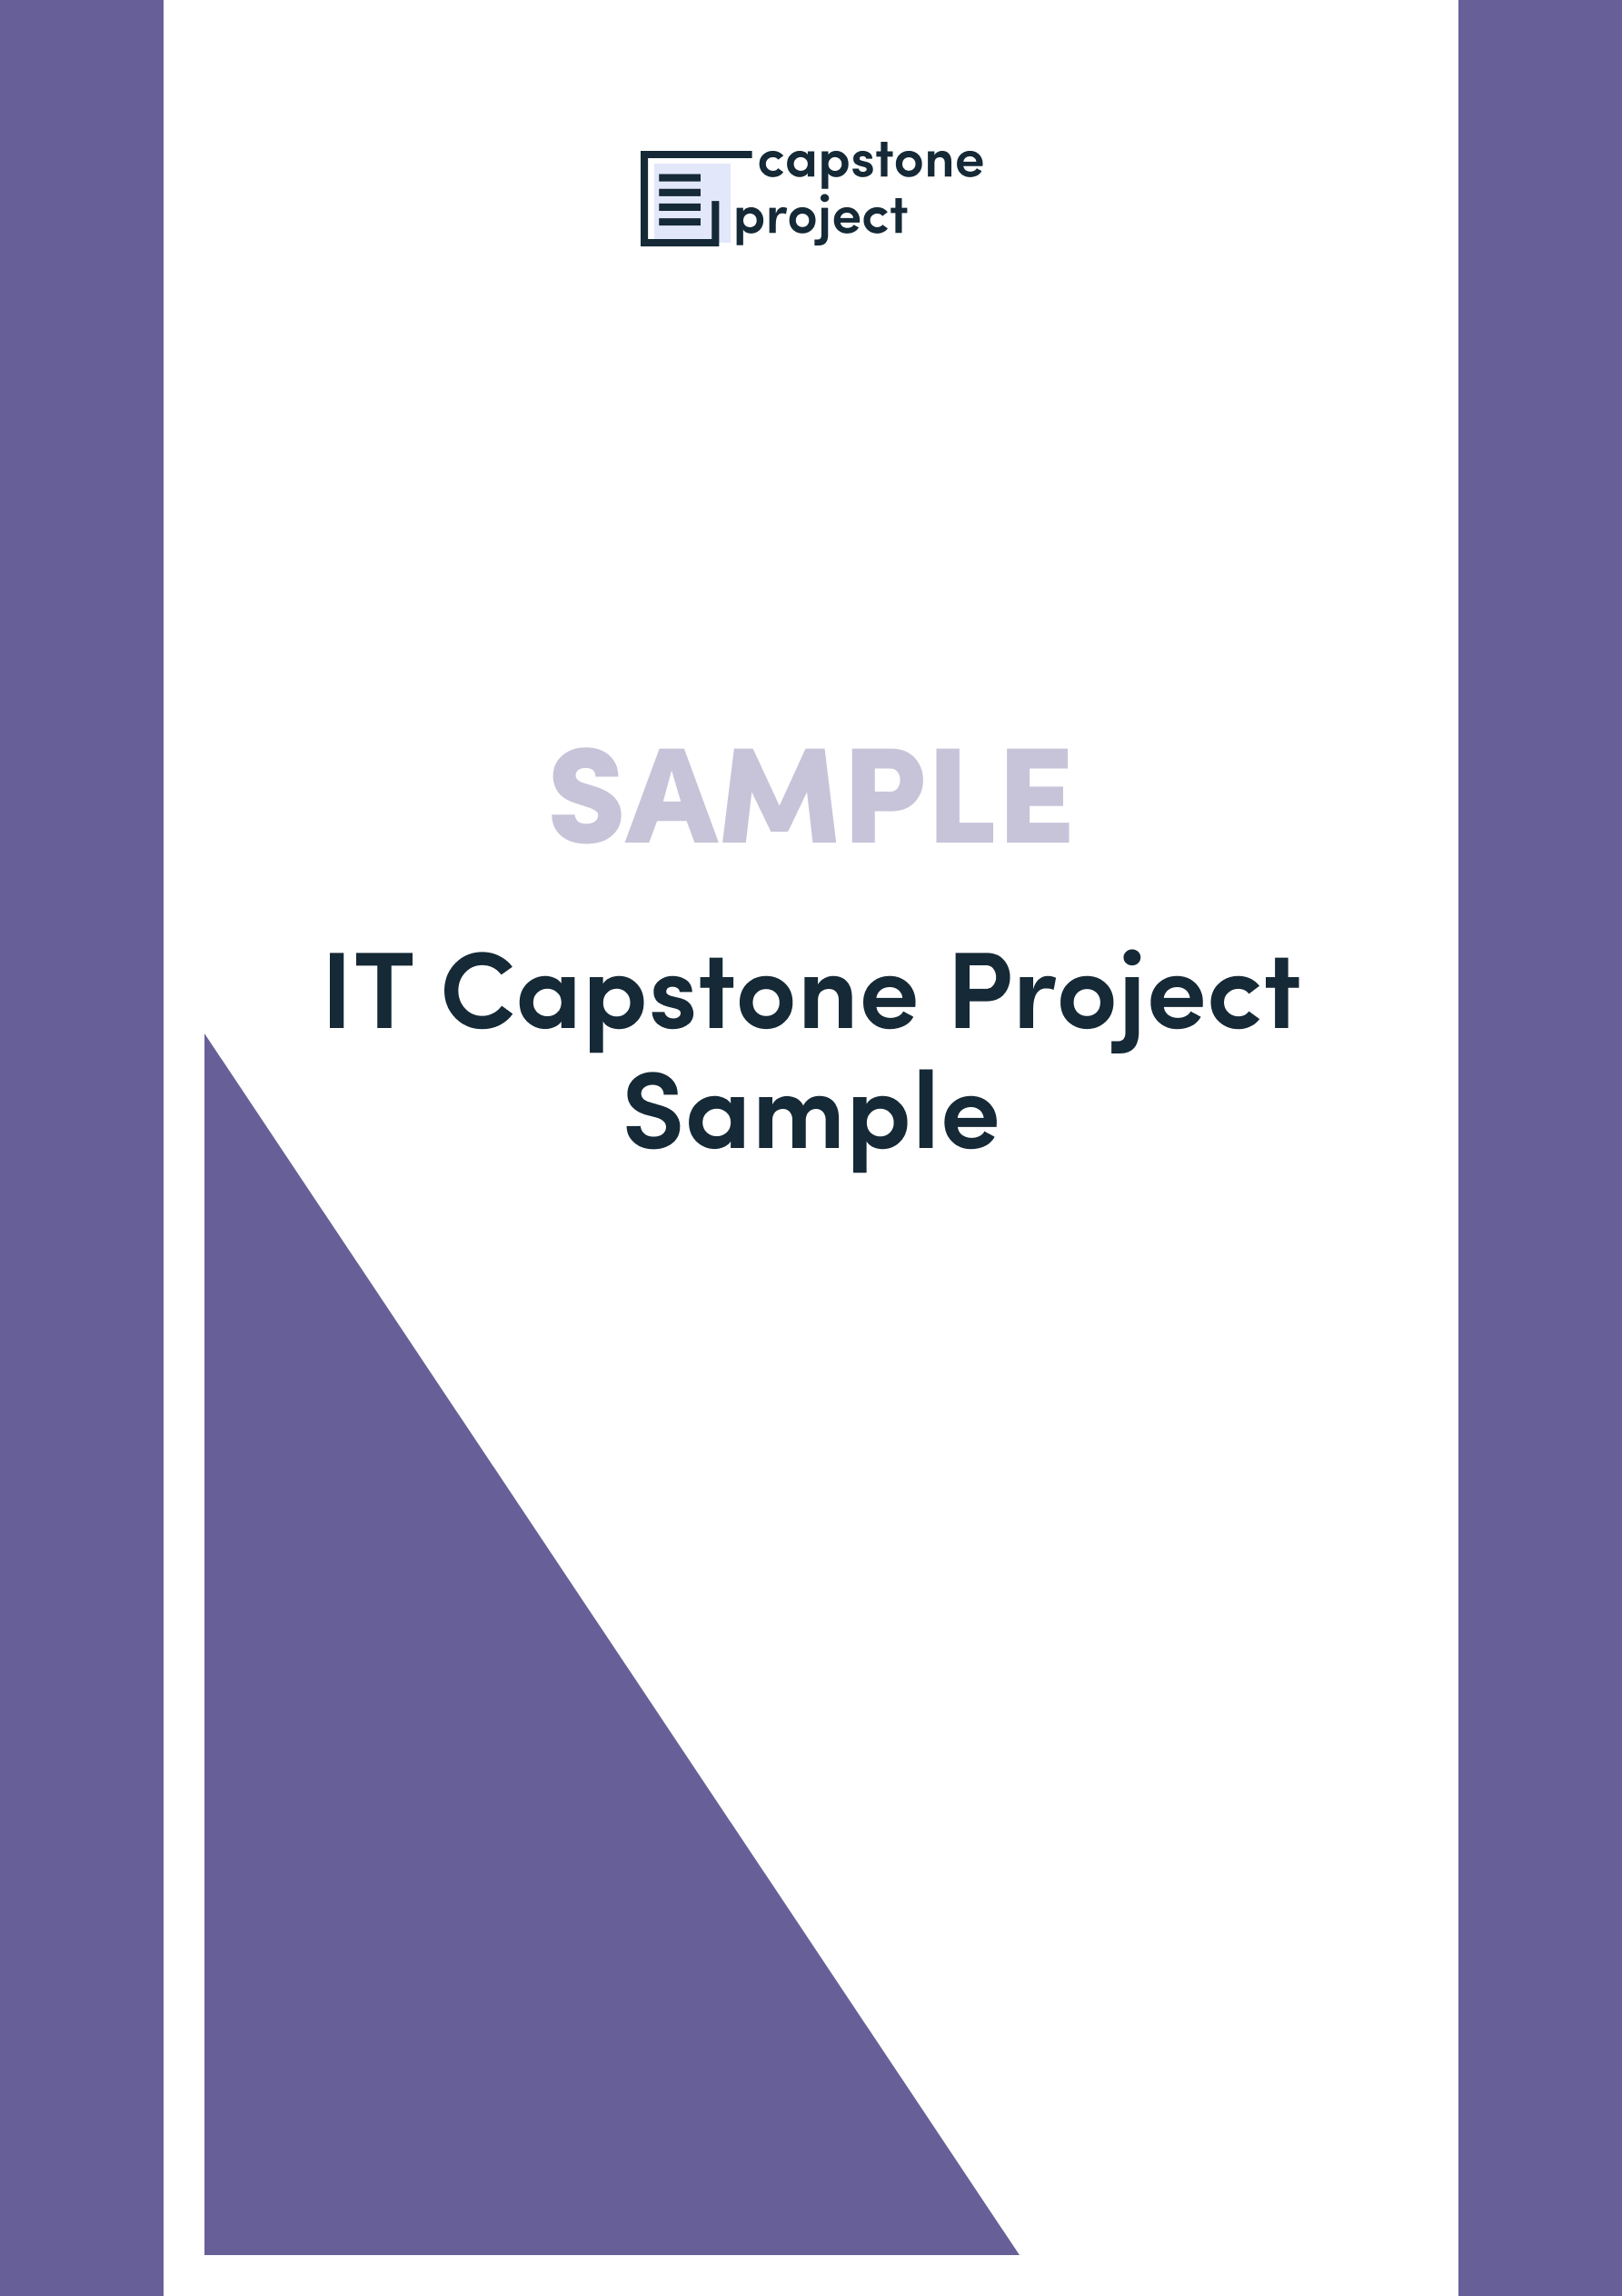 capstone projects it